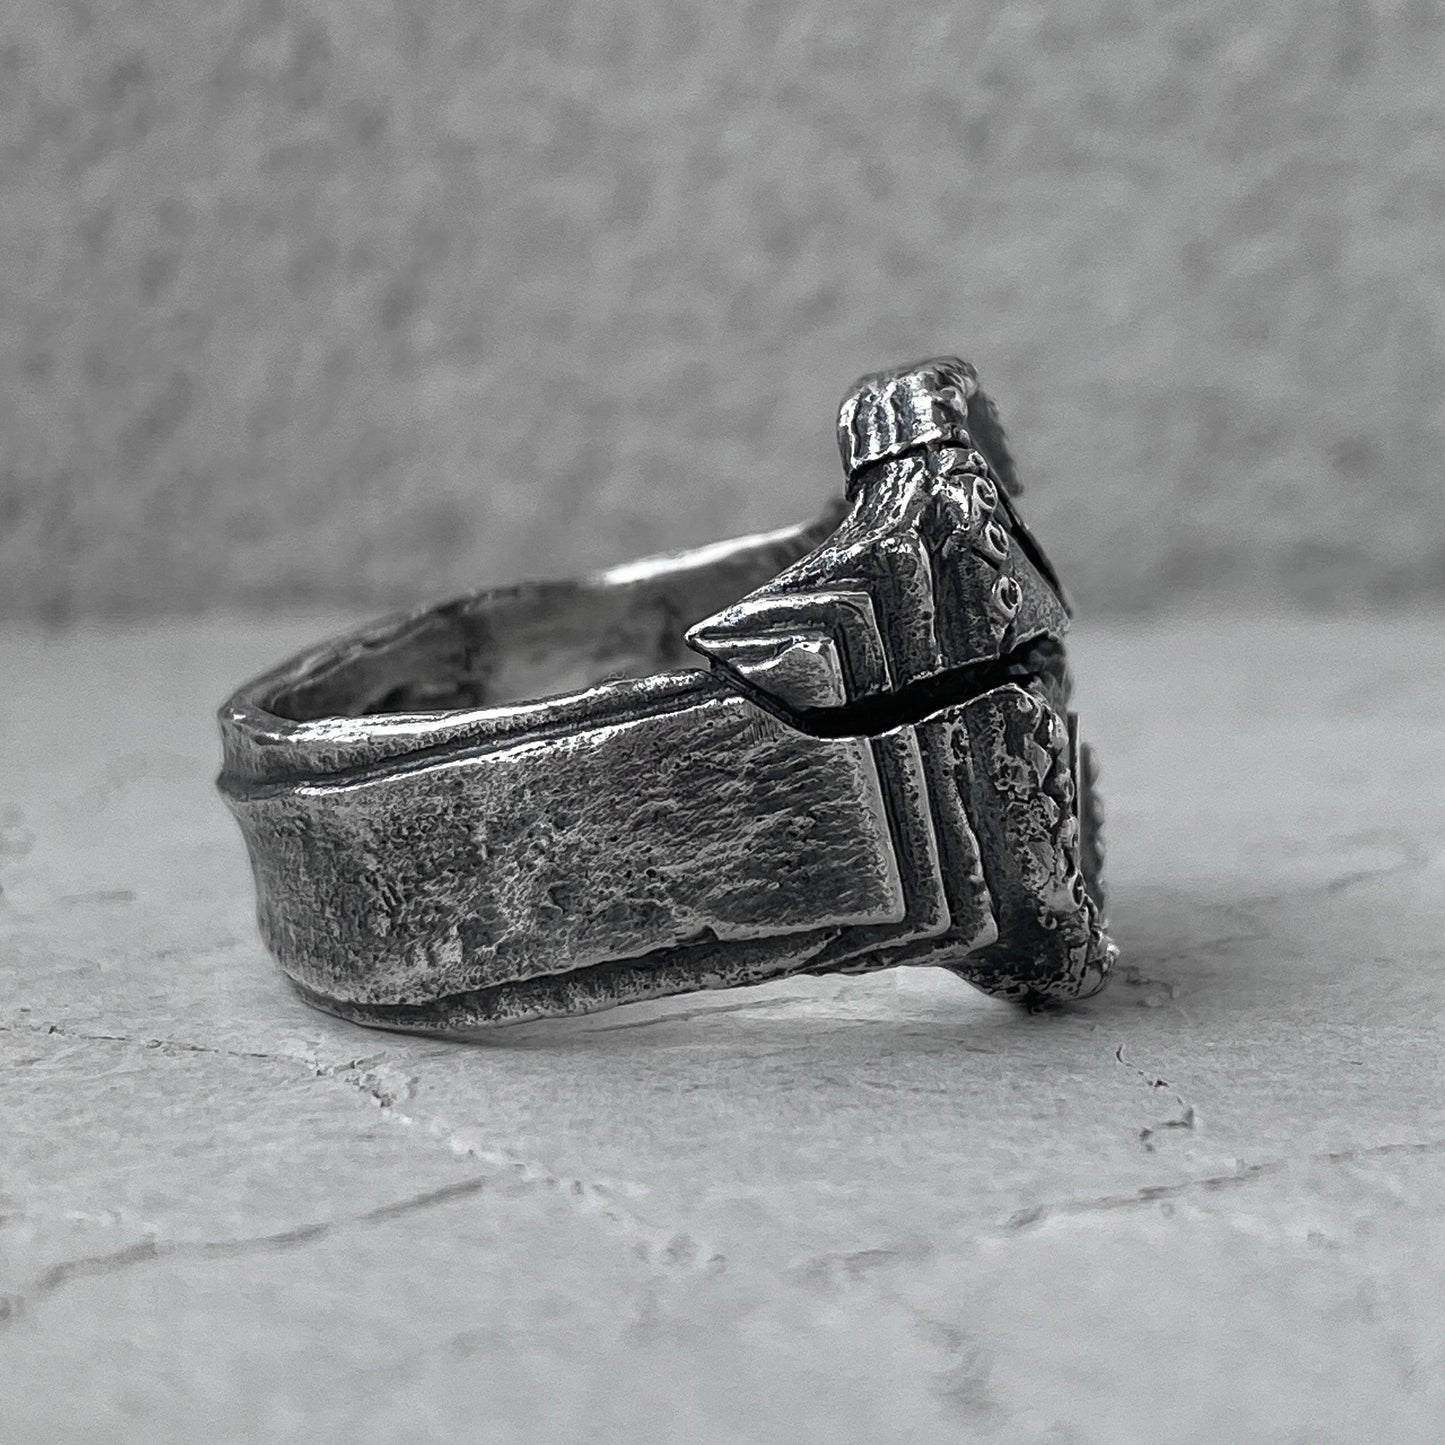 CENTURION ring -a wide brutal ring with an roman motifs and cracks Unusual rings project50g 